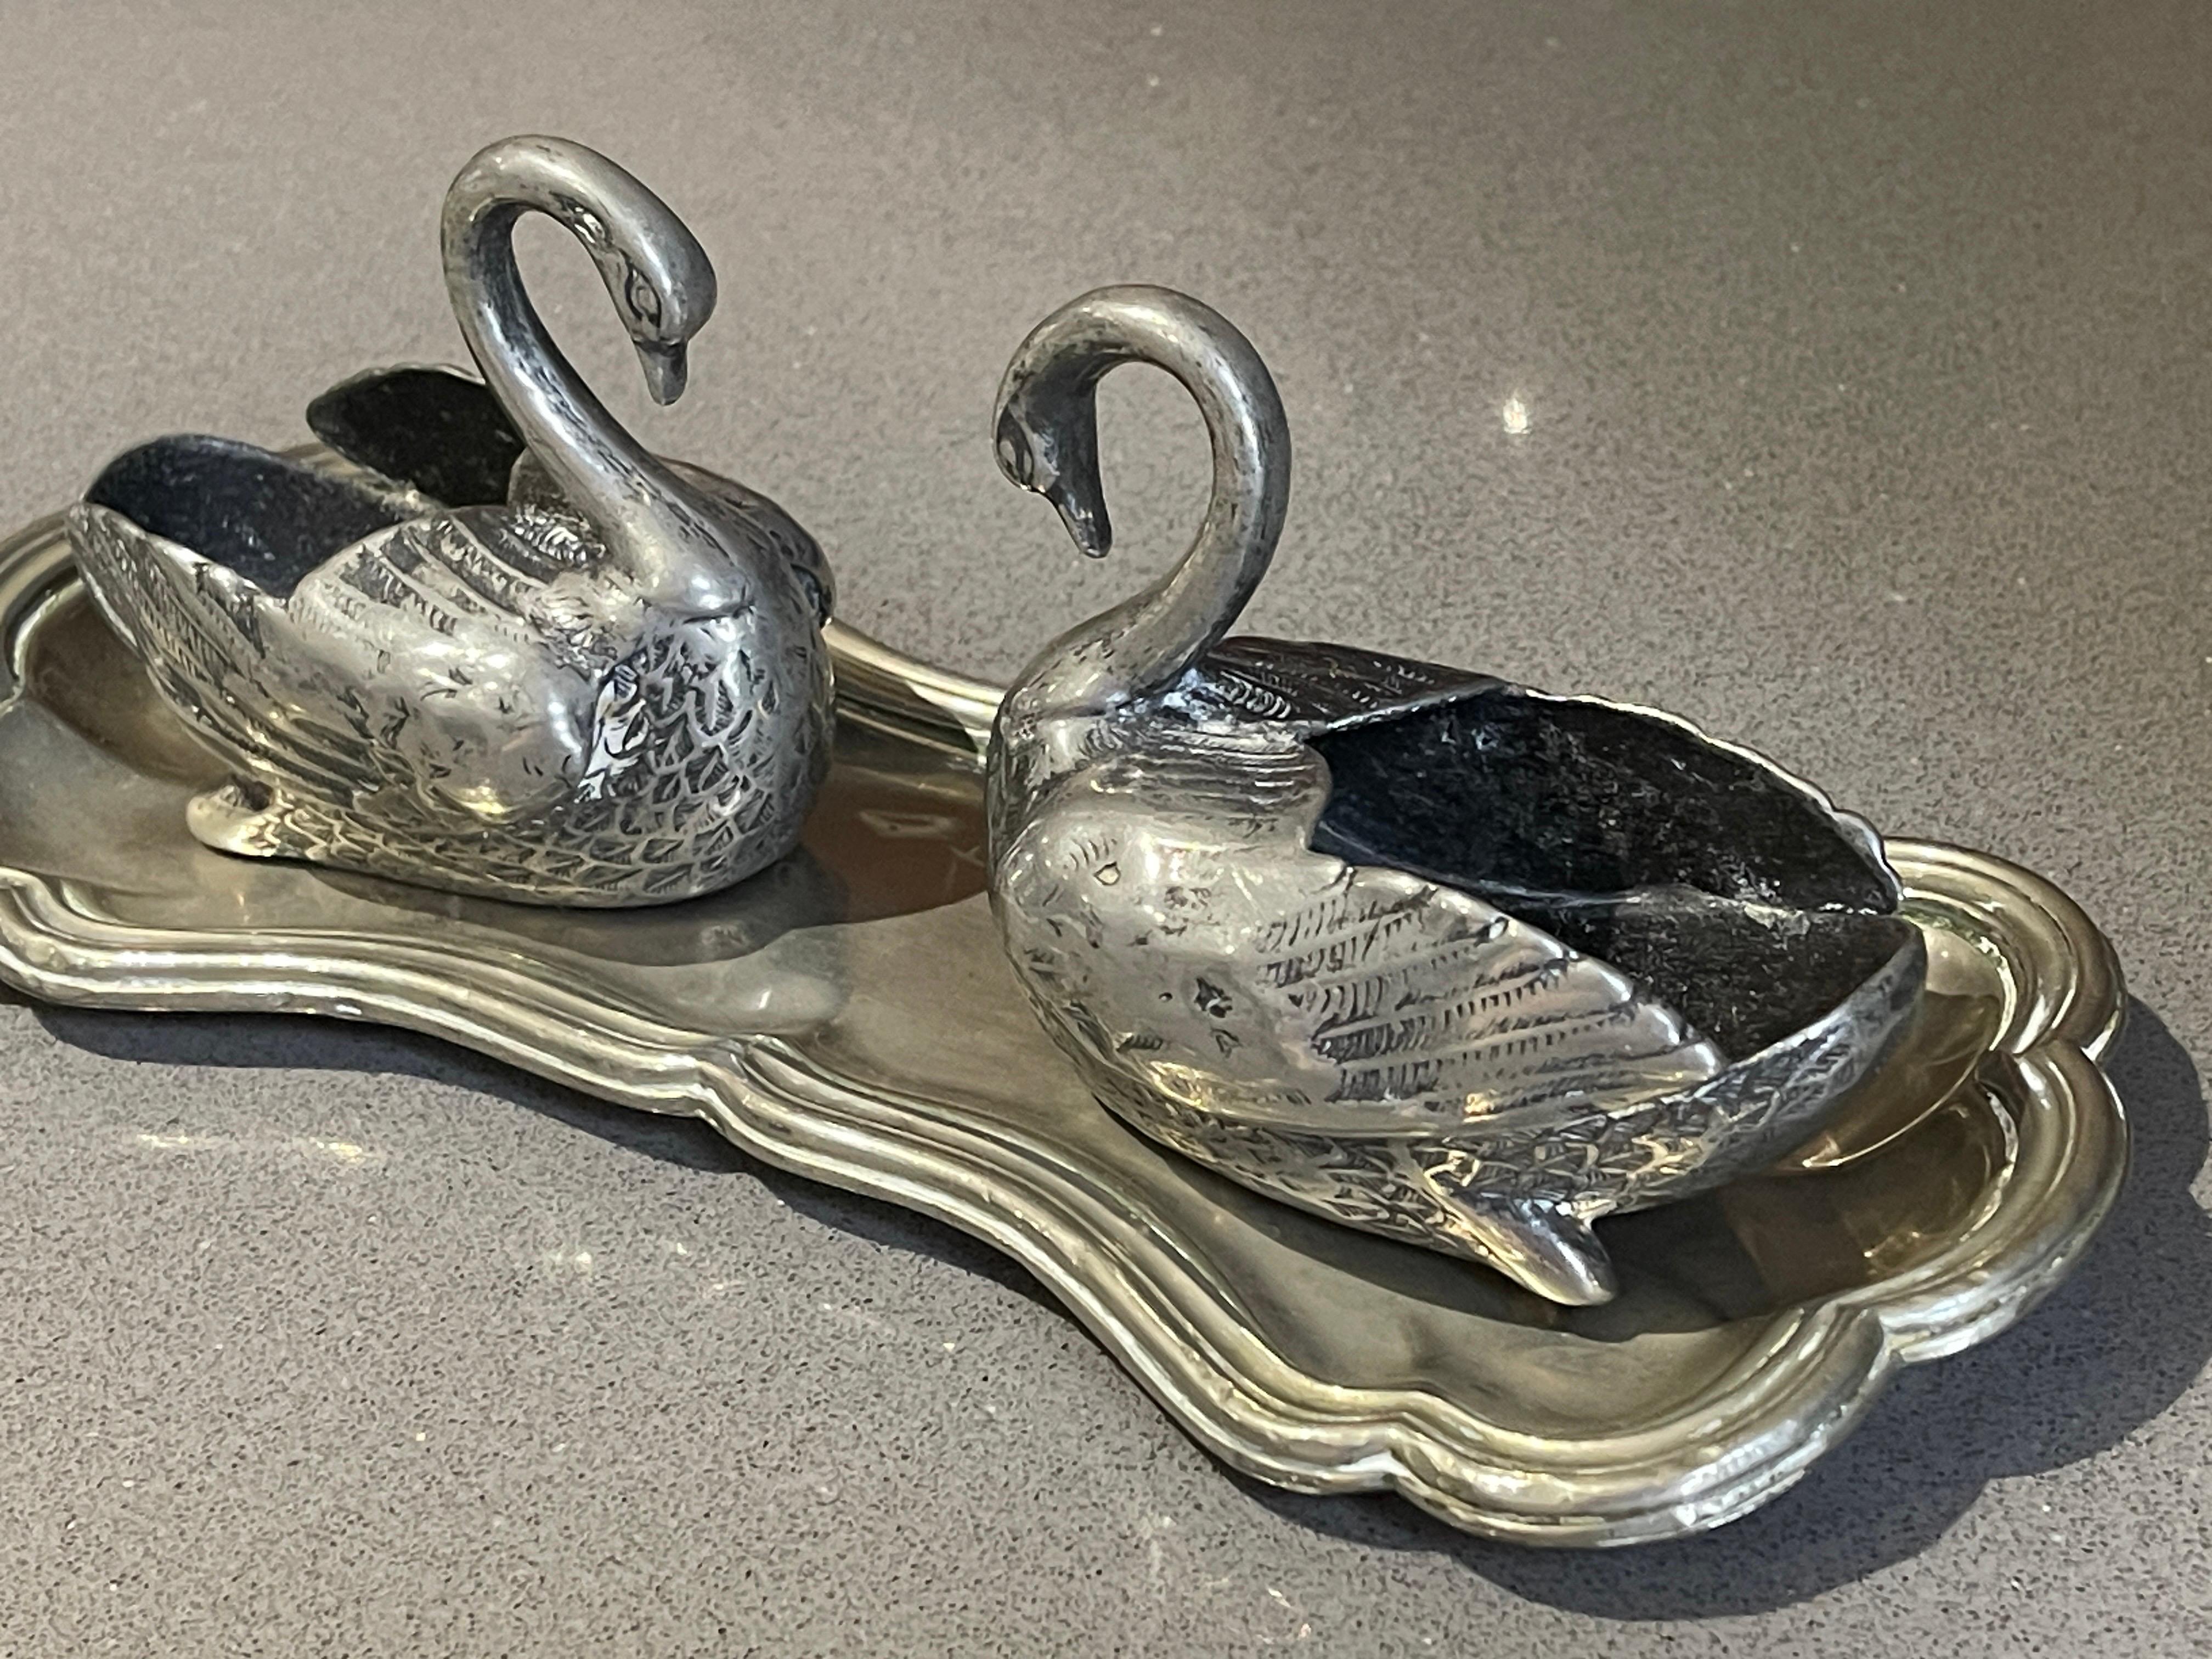 Silver Swan Vintage Salt and Pepper, Set of 2 with Tray
Antique valuable silver salt and pepper shaker or Decorative tableware pressed, cast and chased pair of swann. Oval, domed body on short, curve  All-encompassing C-curves in relief,